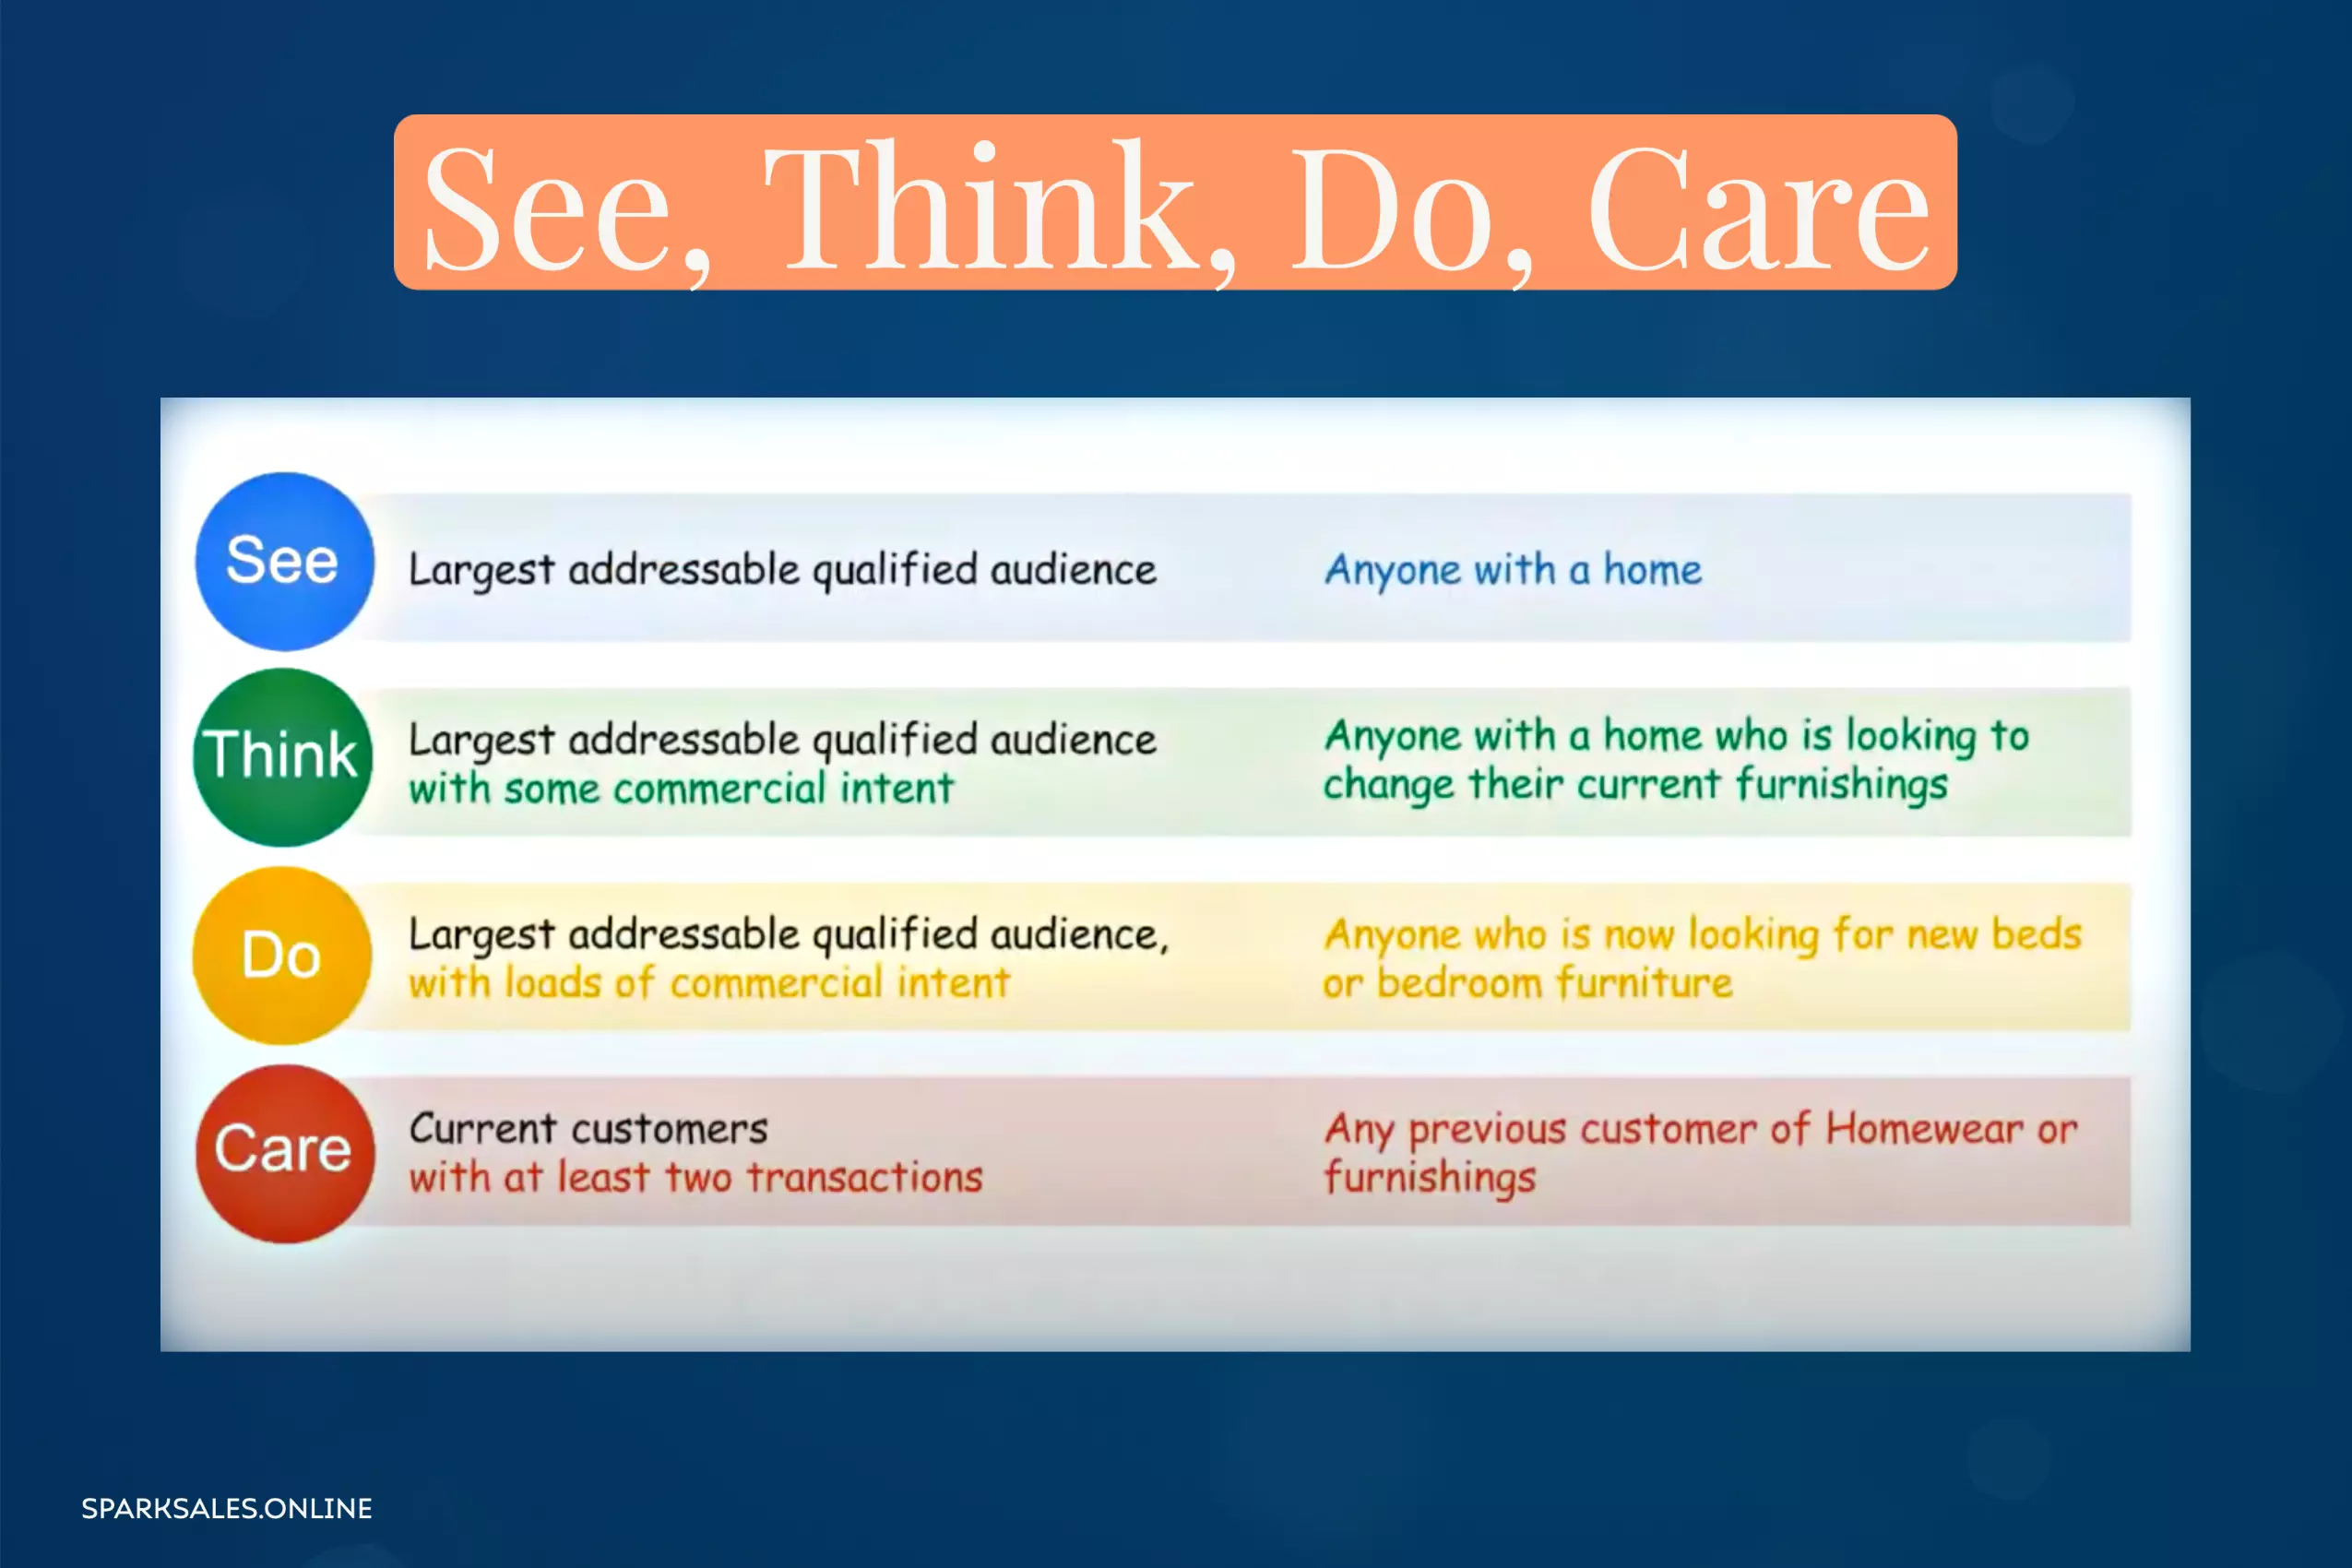 The main components of the See, Think, Do, Care framework